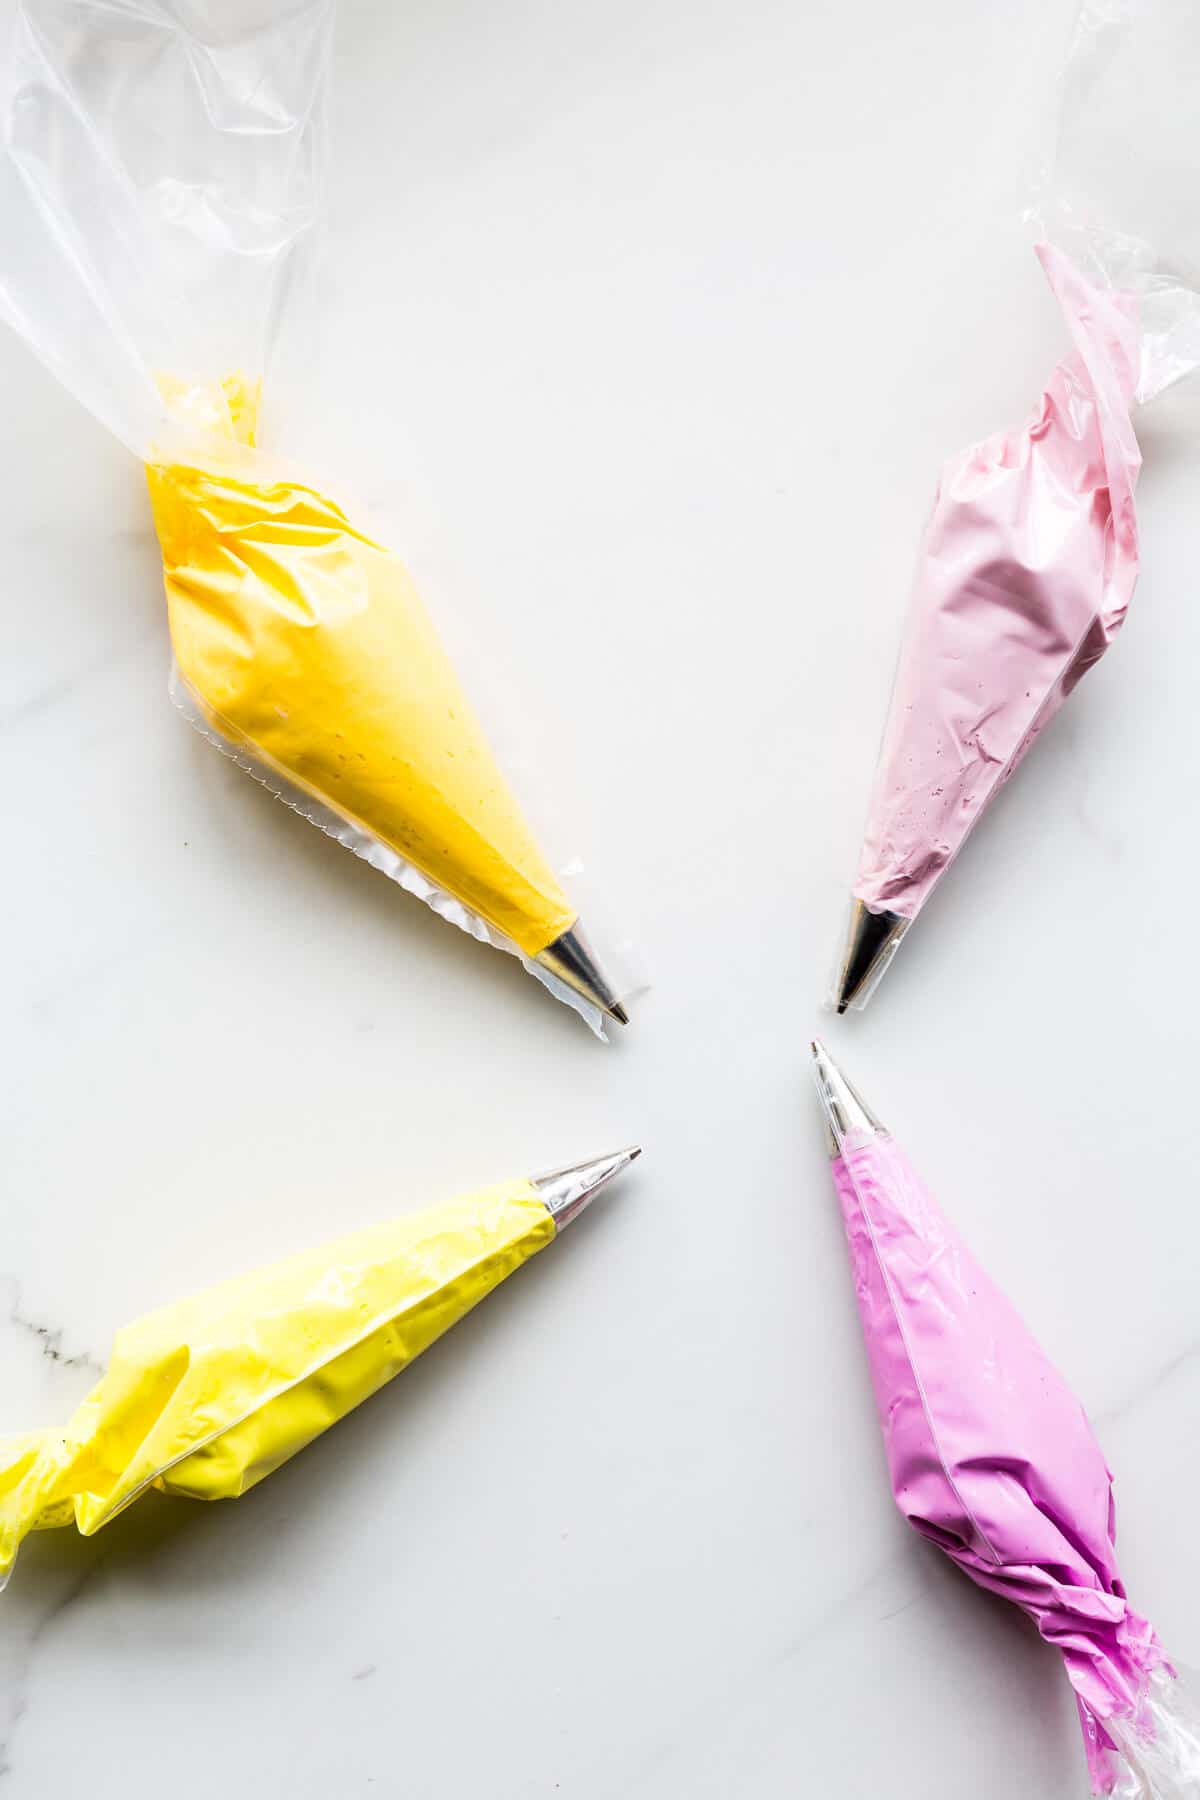 Piping bags filled with coloured royal icing to make homemade sprinkles.